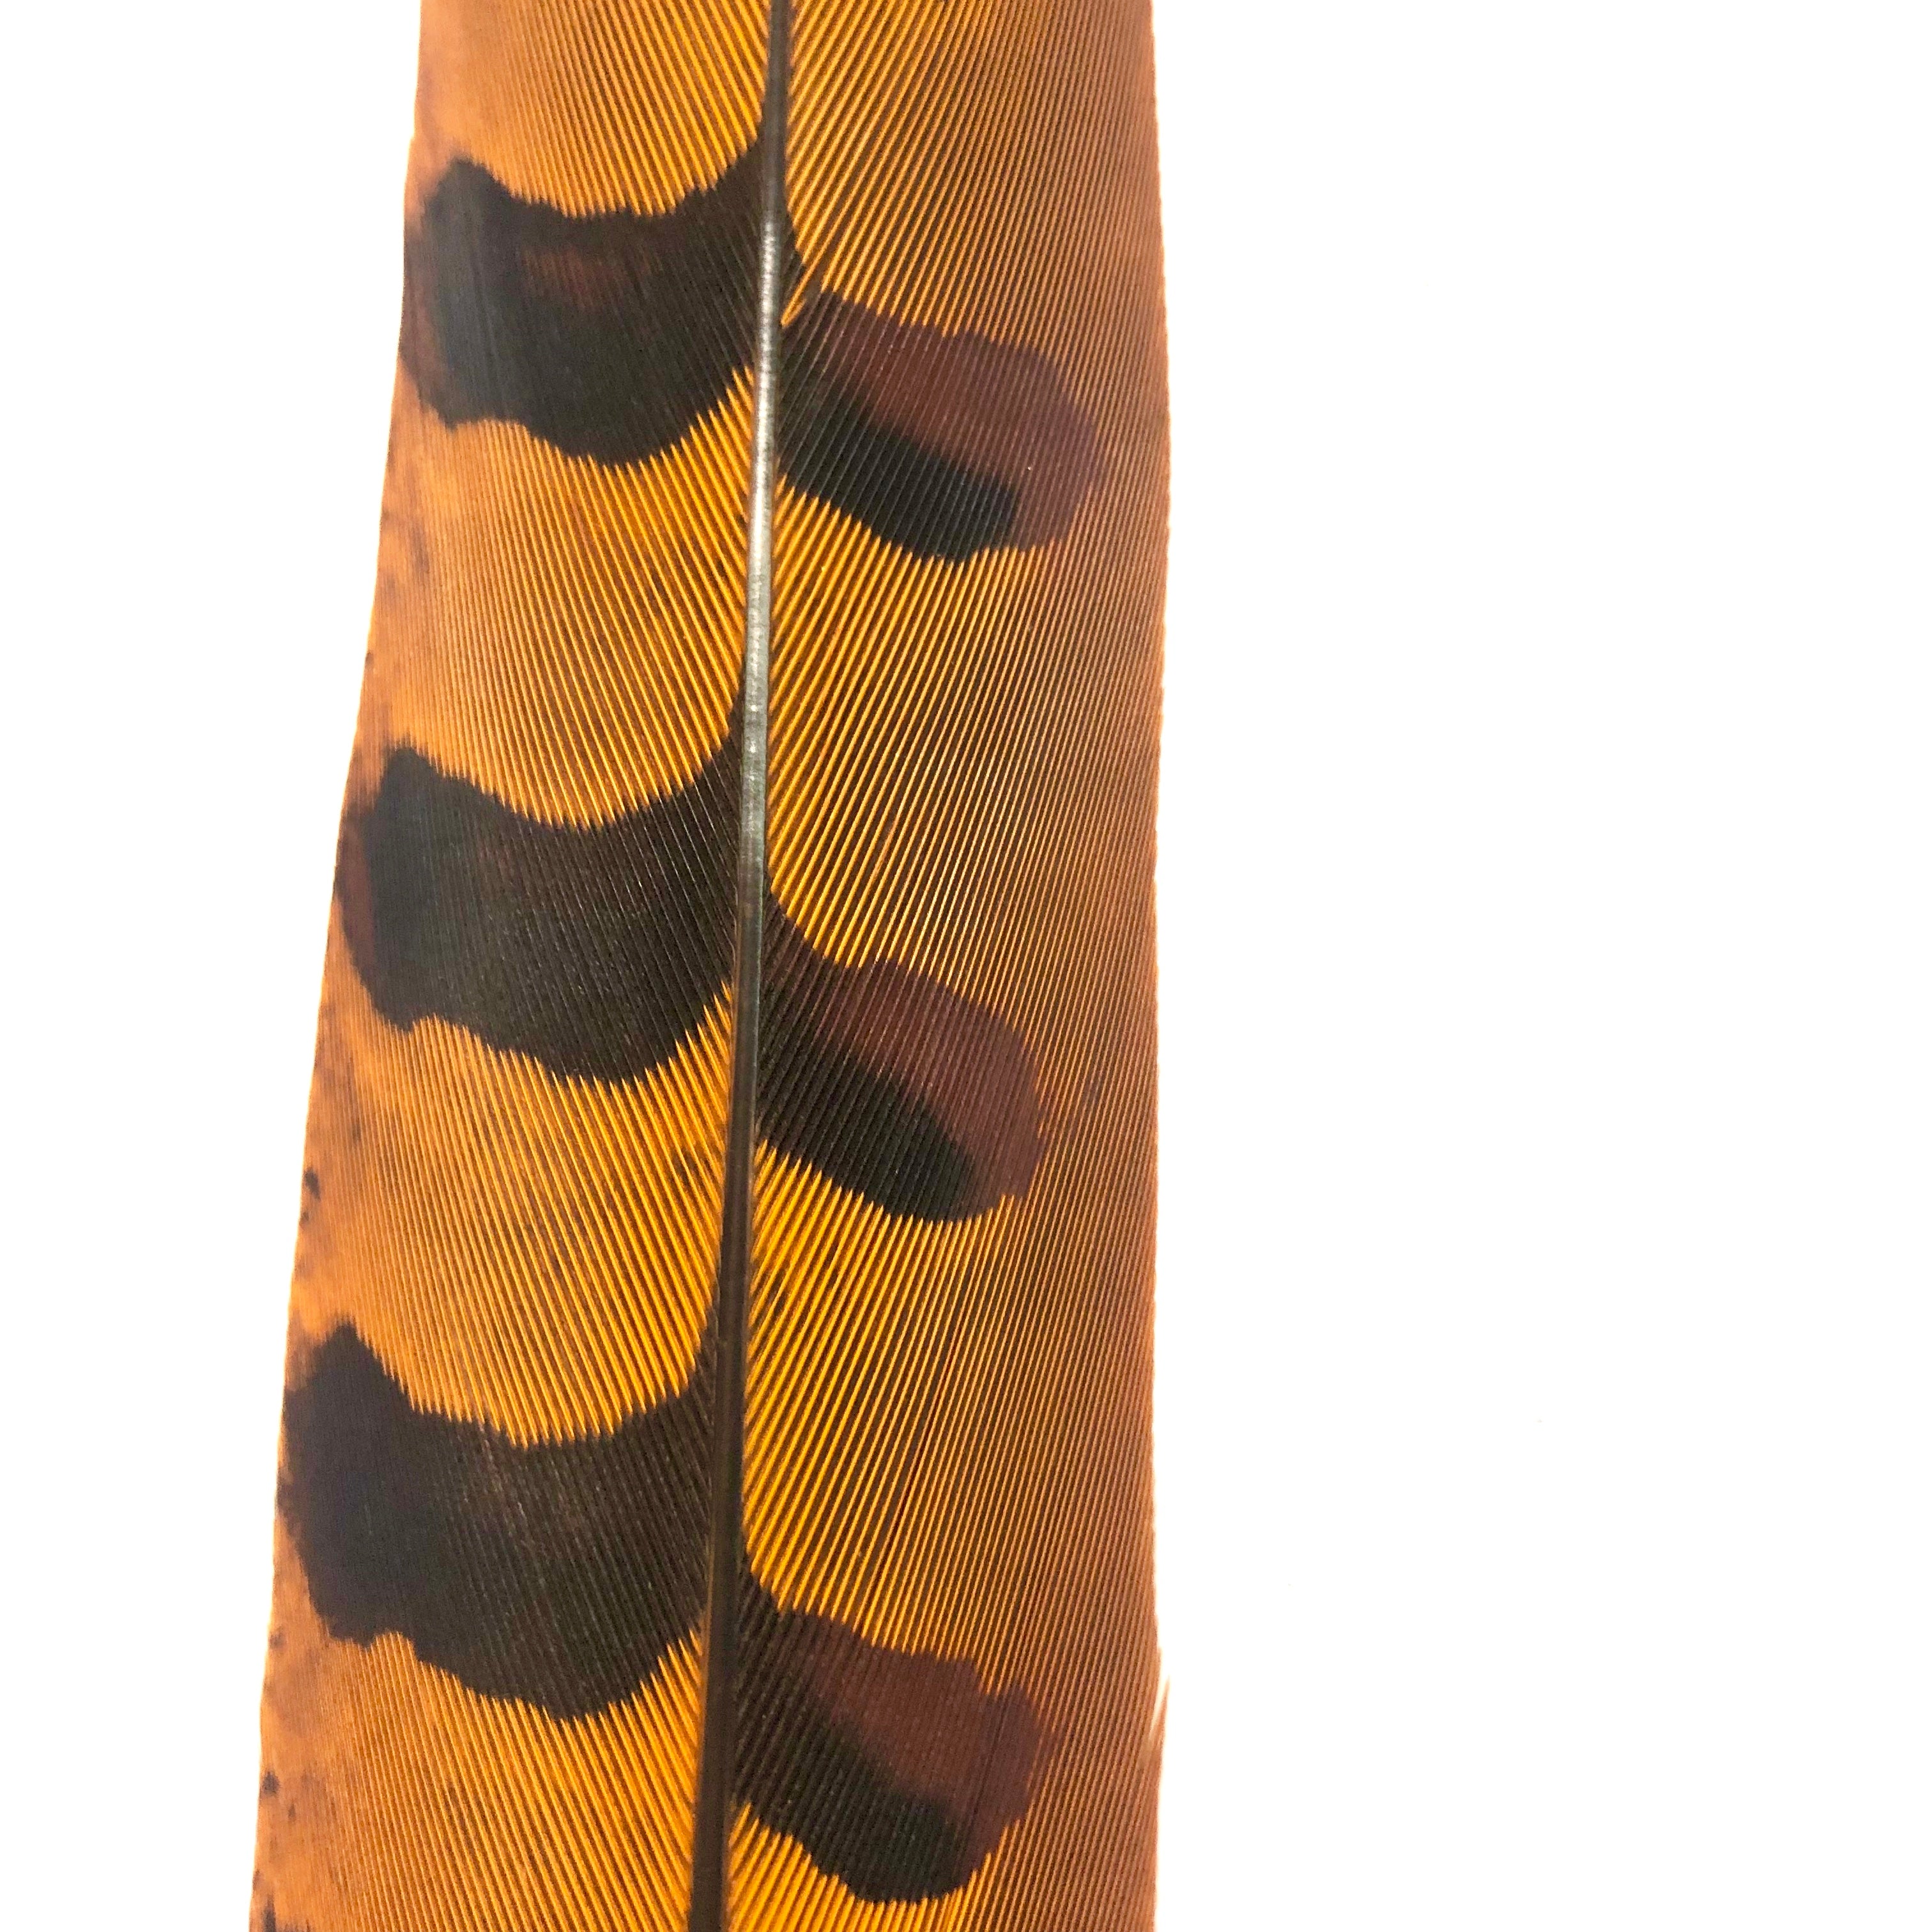 30" to 32" Reeves Pheasant Tail Feather - Orange ((SECONDS))